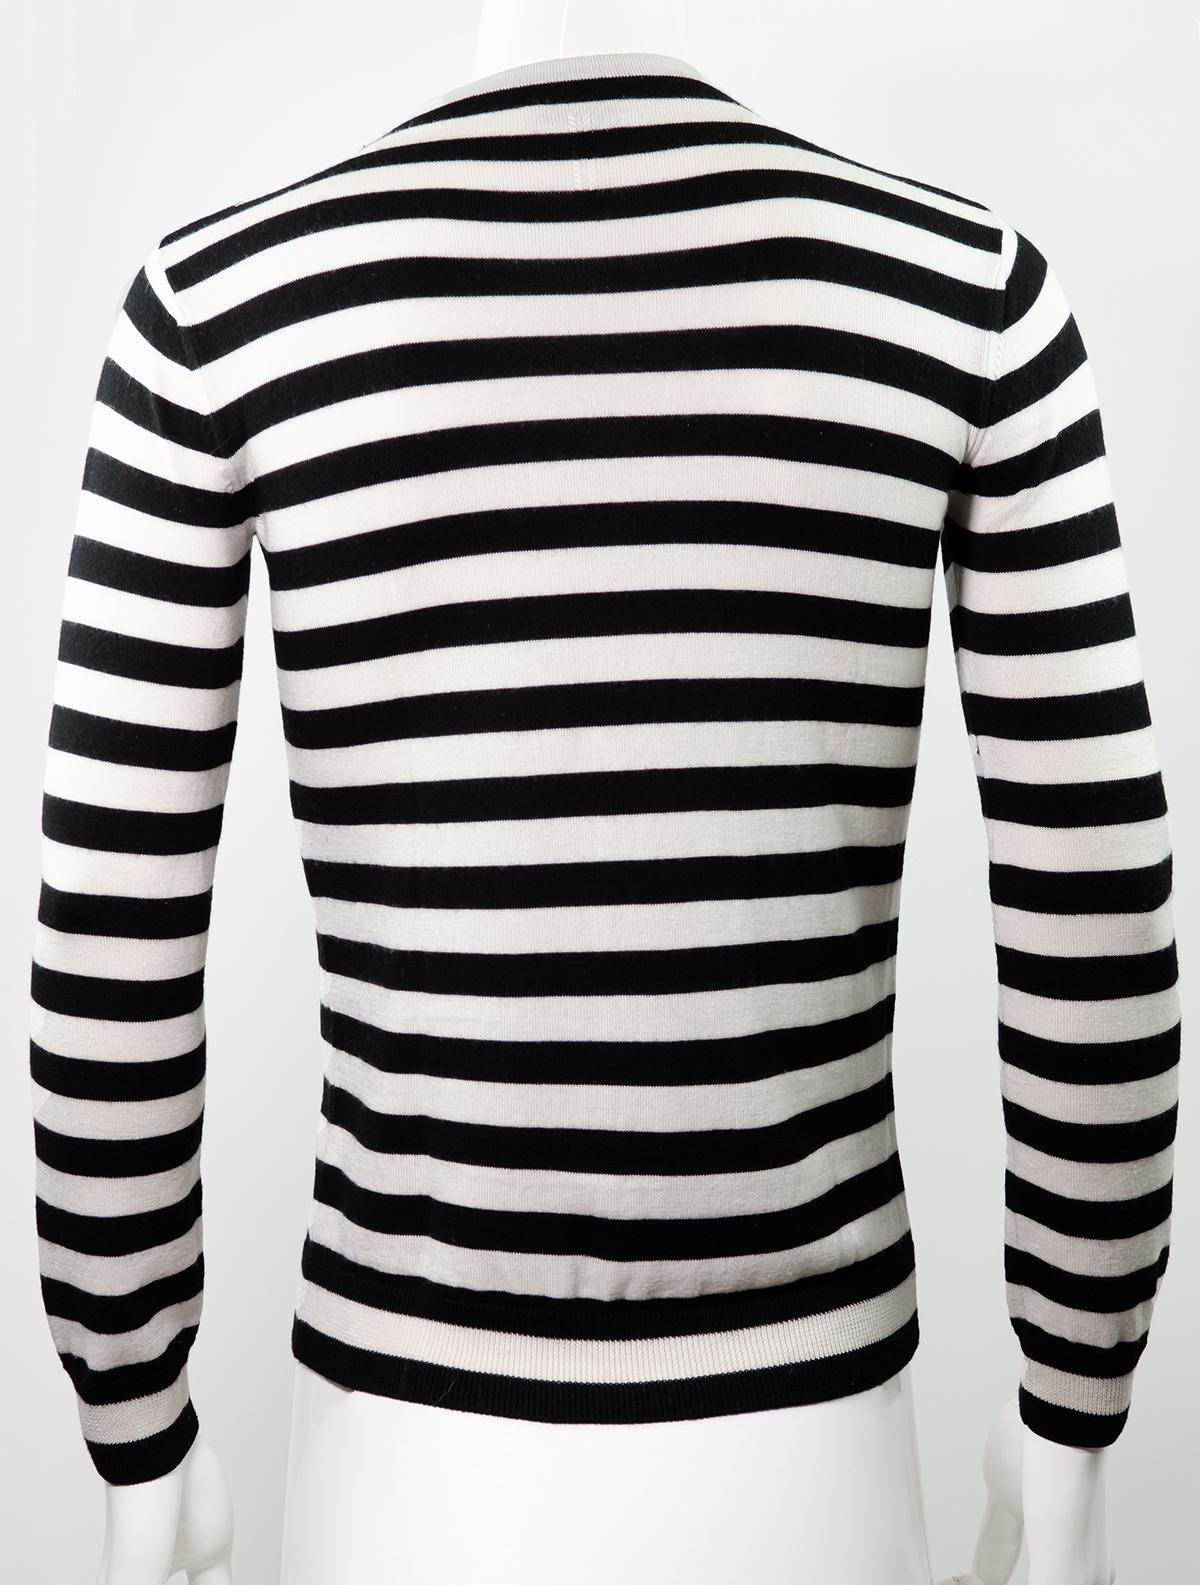 SAINT LAURENT By HEDI SLIMANE F/W 2015 Striped Sweater S In Excellent Condition For Sale In Berlin, BE